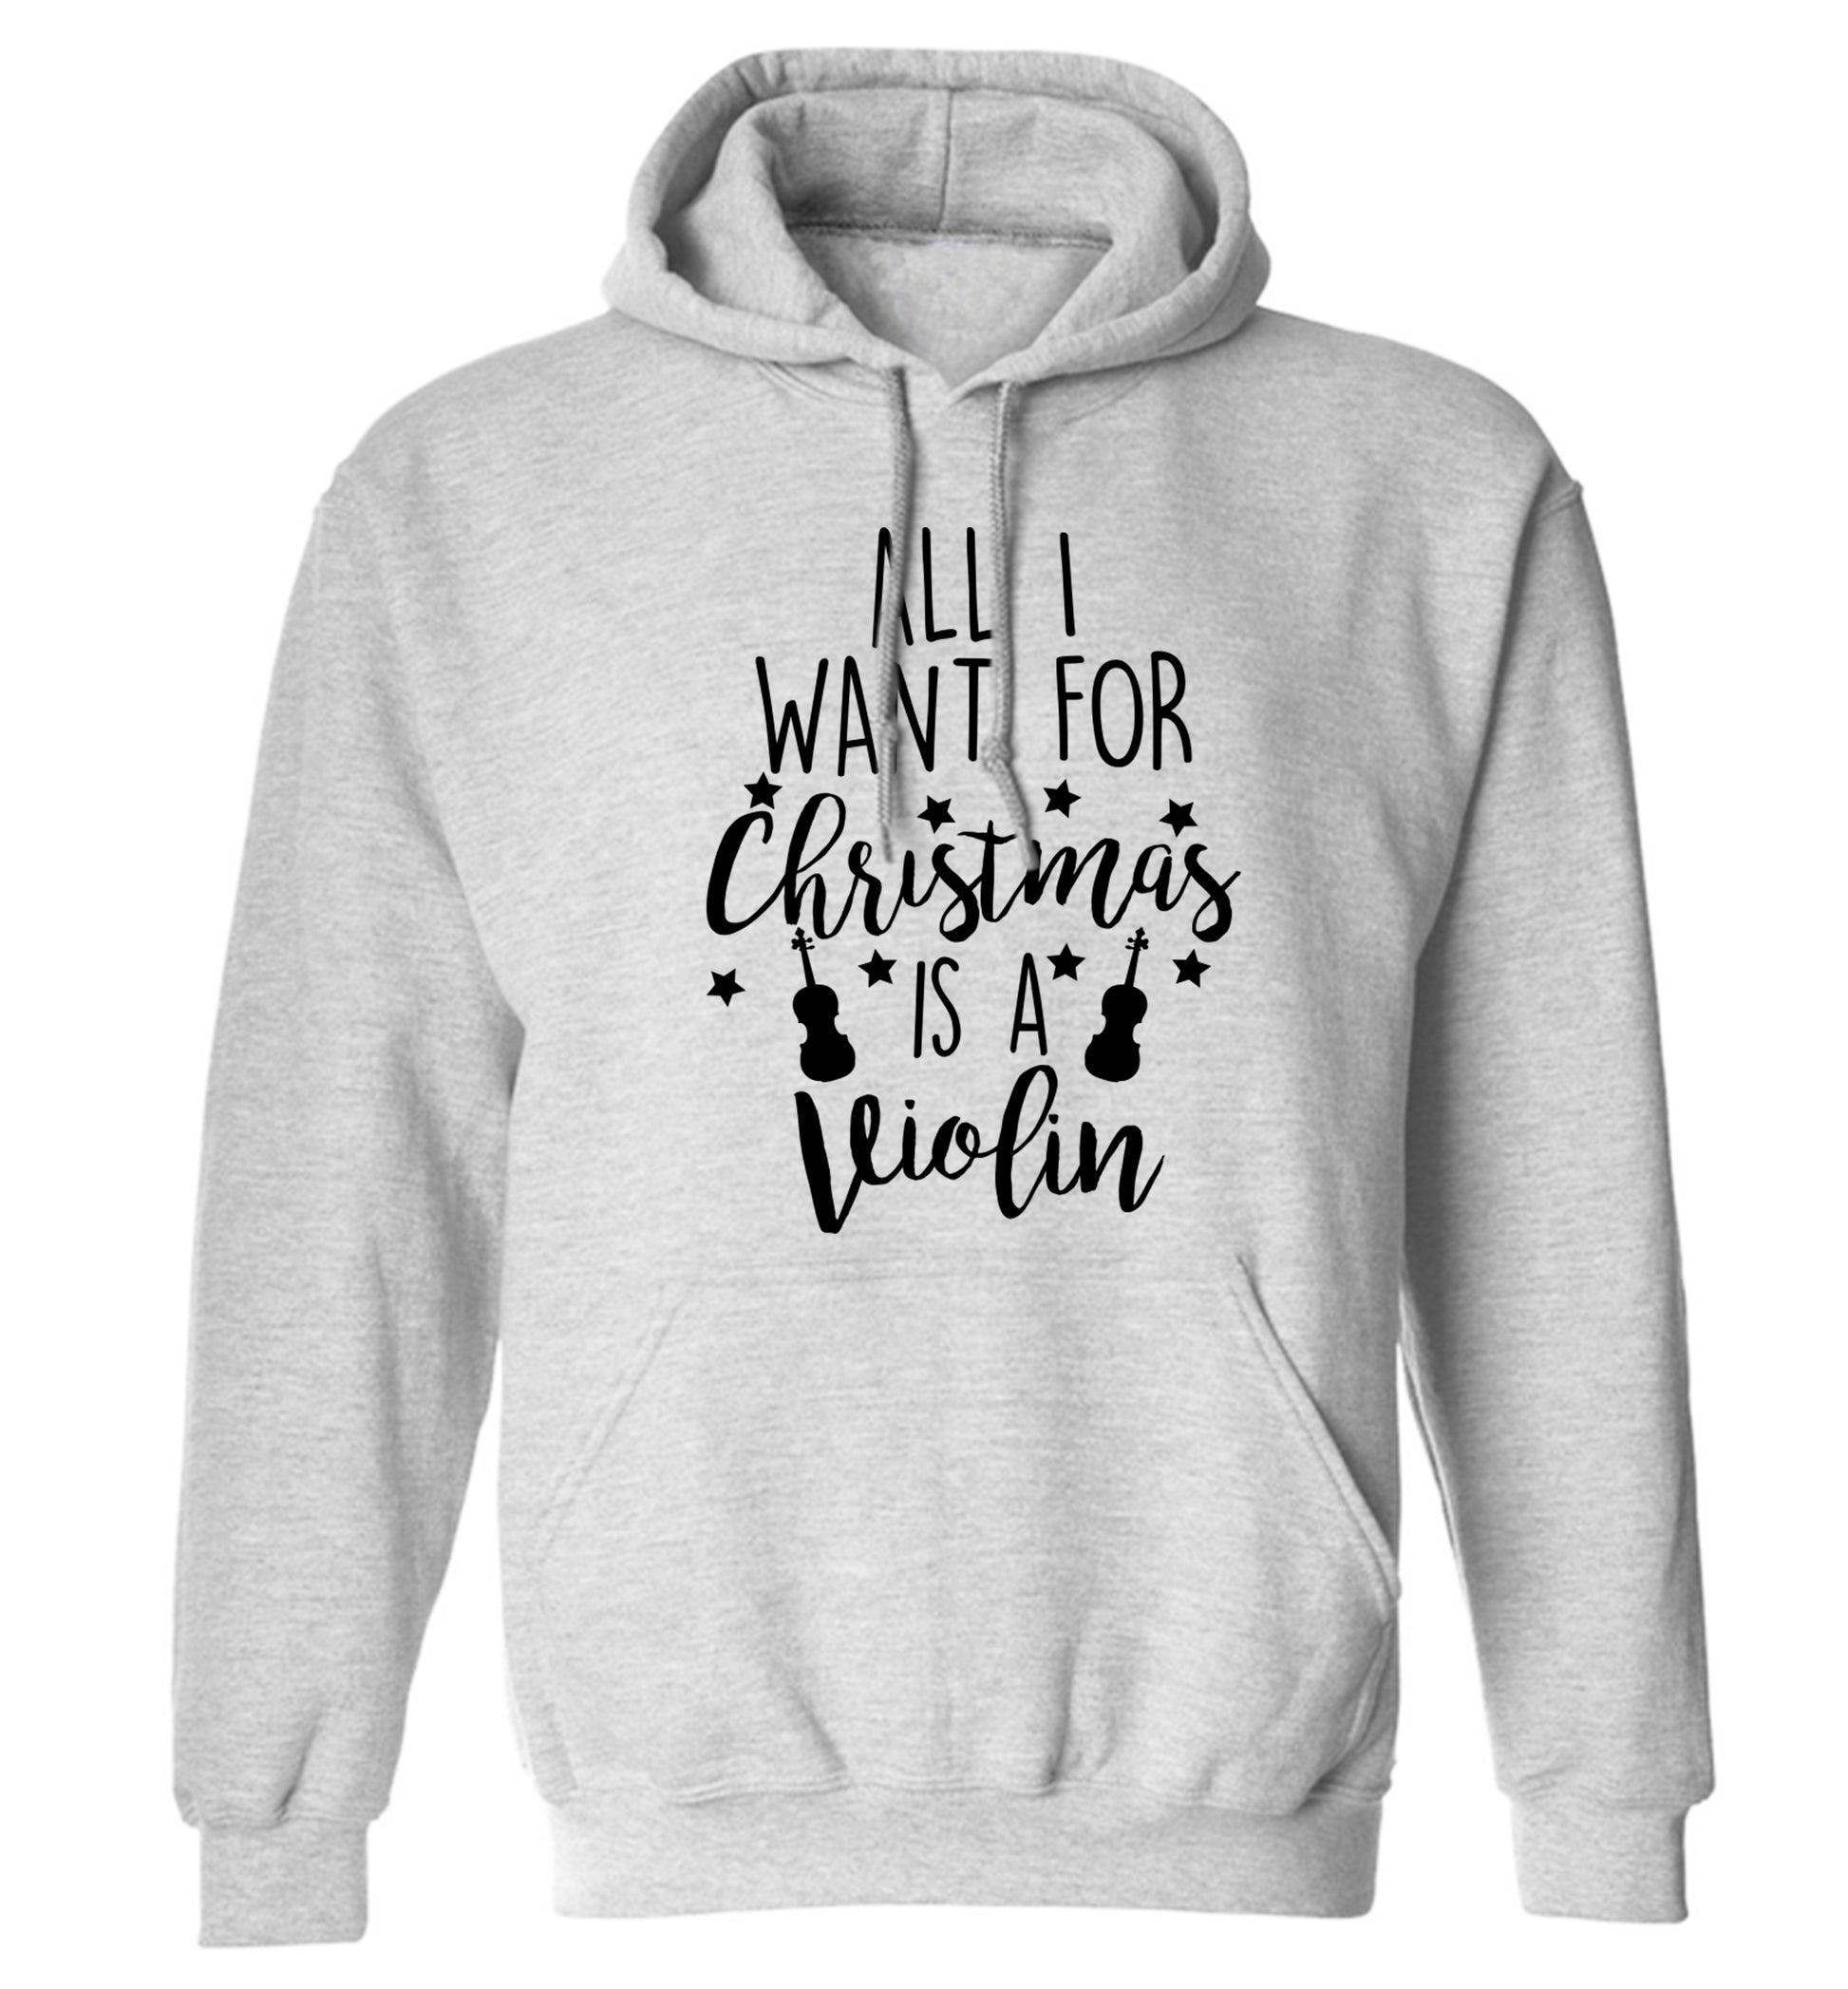 All I Want For Christmas is a Violin adults unisex grey hoodie 2XL